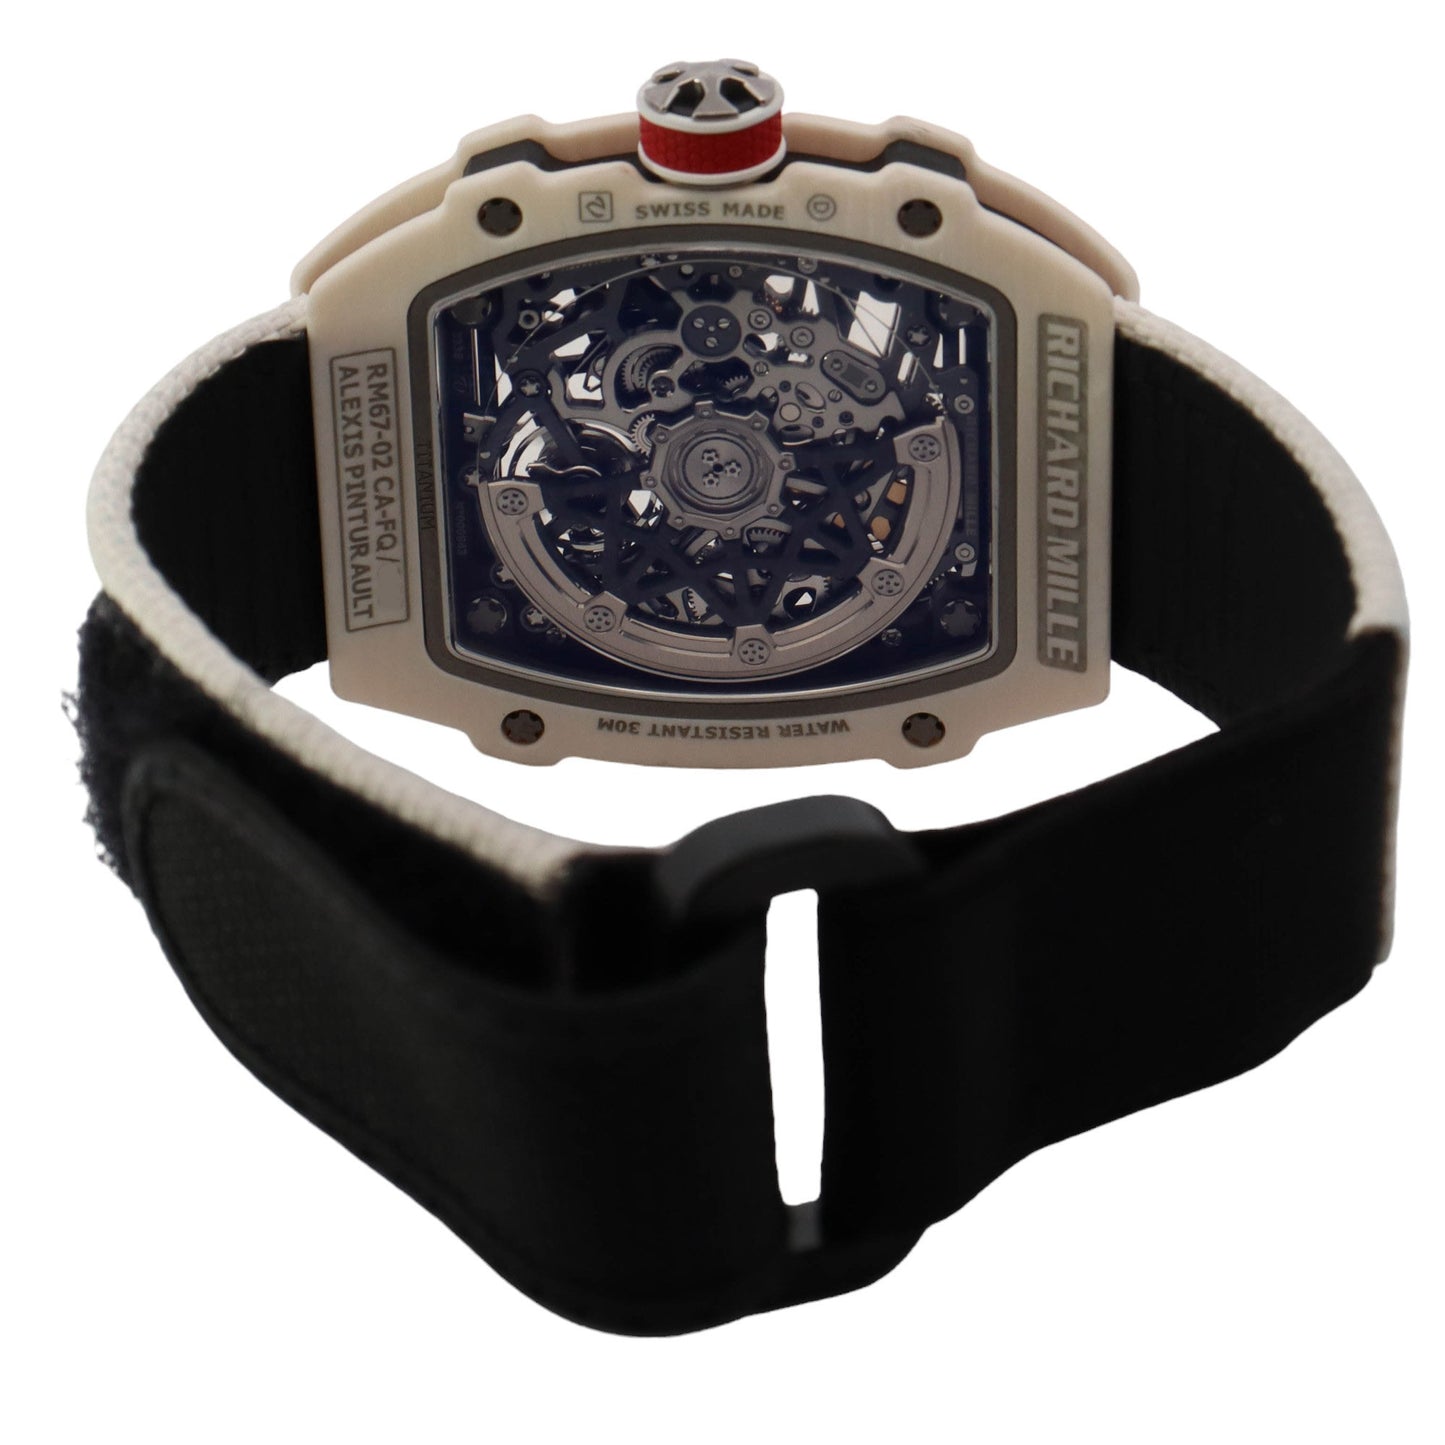 Richard Mille RM67-02 White Carbon TPT 38.7 x 47.5mm Skeleton Dot Dial Watch Reference# RM67-02 - Happy Jewelers Fine Jewelry Lifetime Warranty